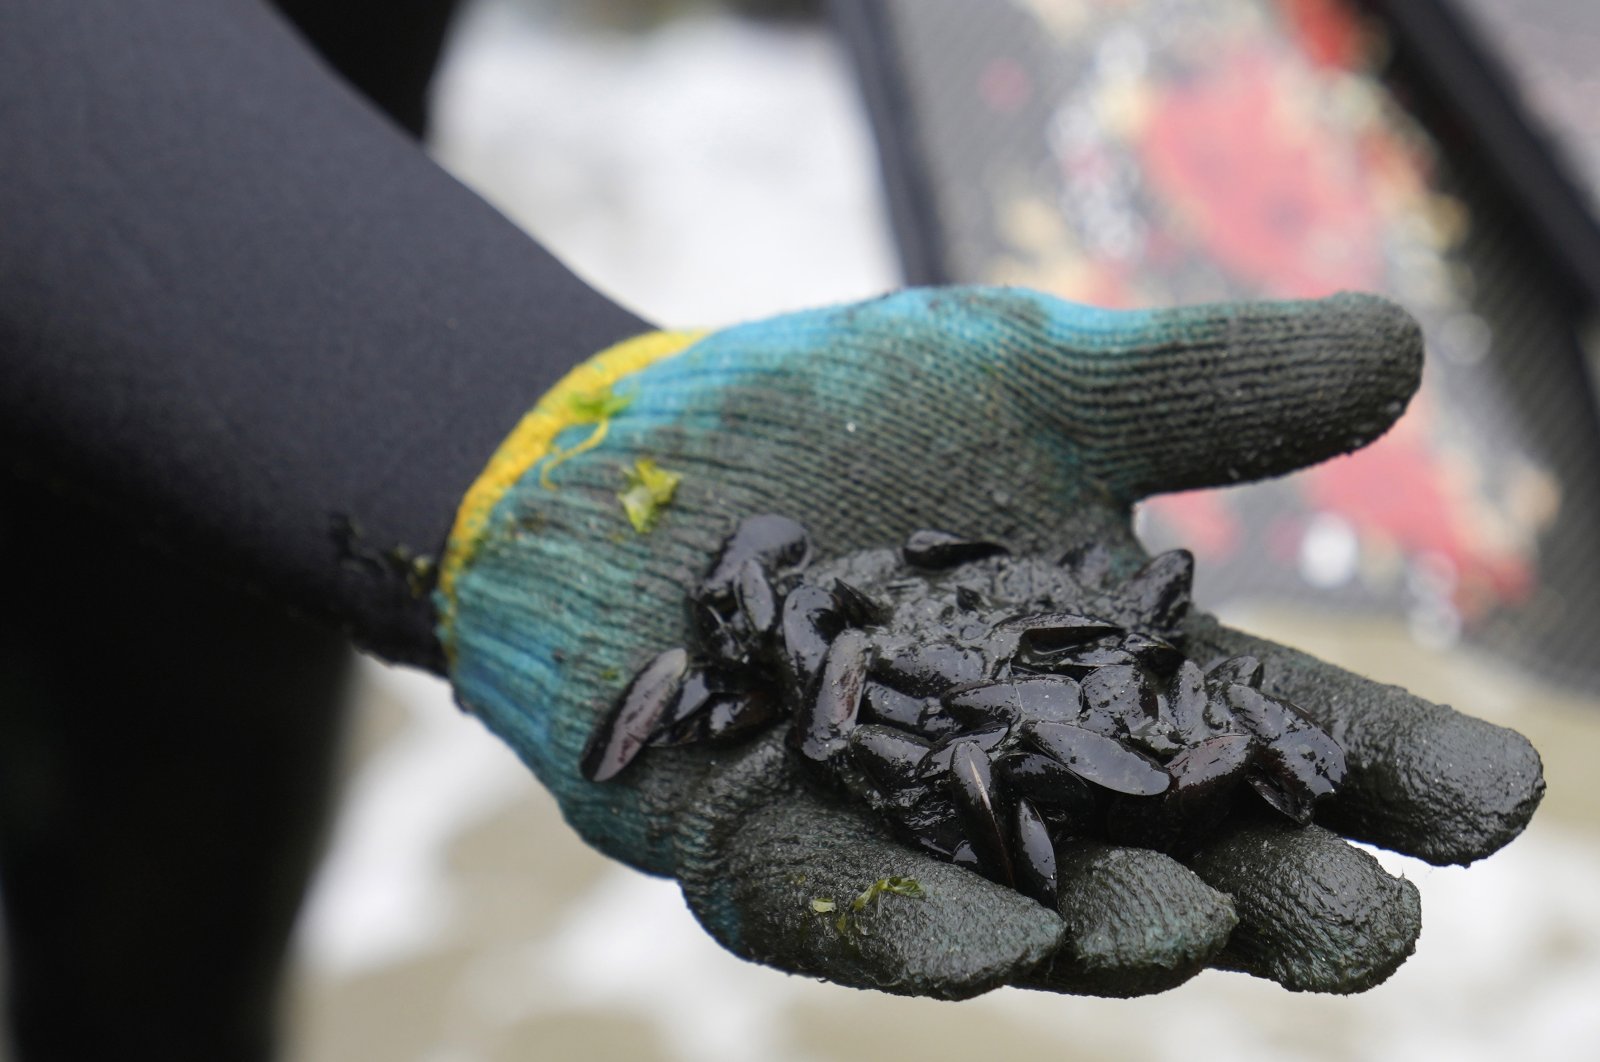 Fisherman Kiefer Taboada shows a handful of mollusks coated with oil waste at Culebras Beach in the Ventanilla district of Callao, Peru, Feb. 24, 2022. (AP File Photo)